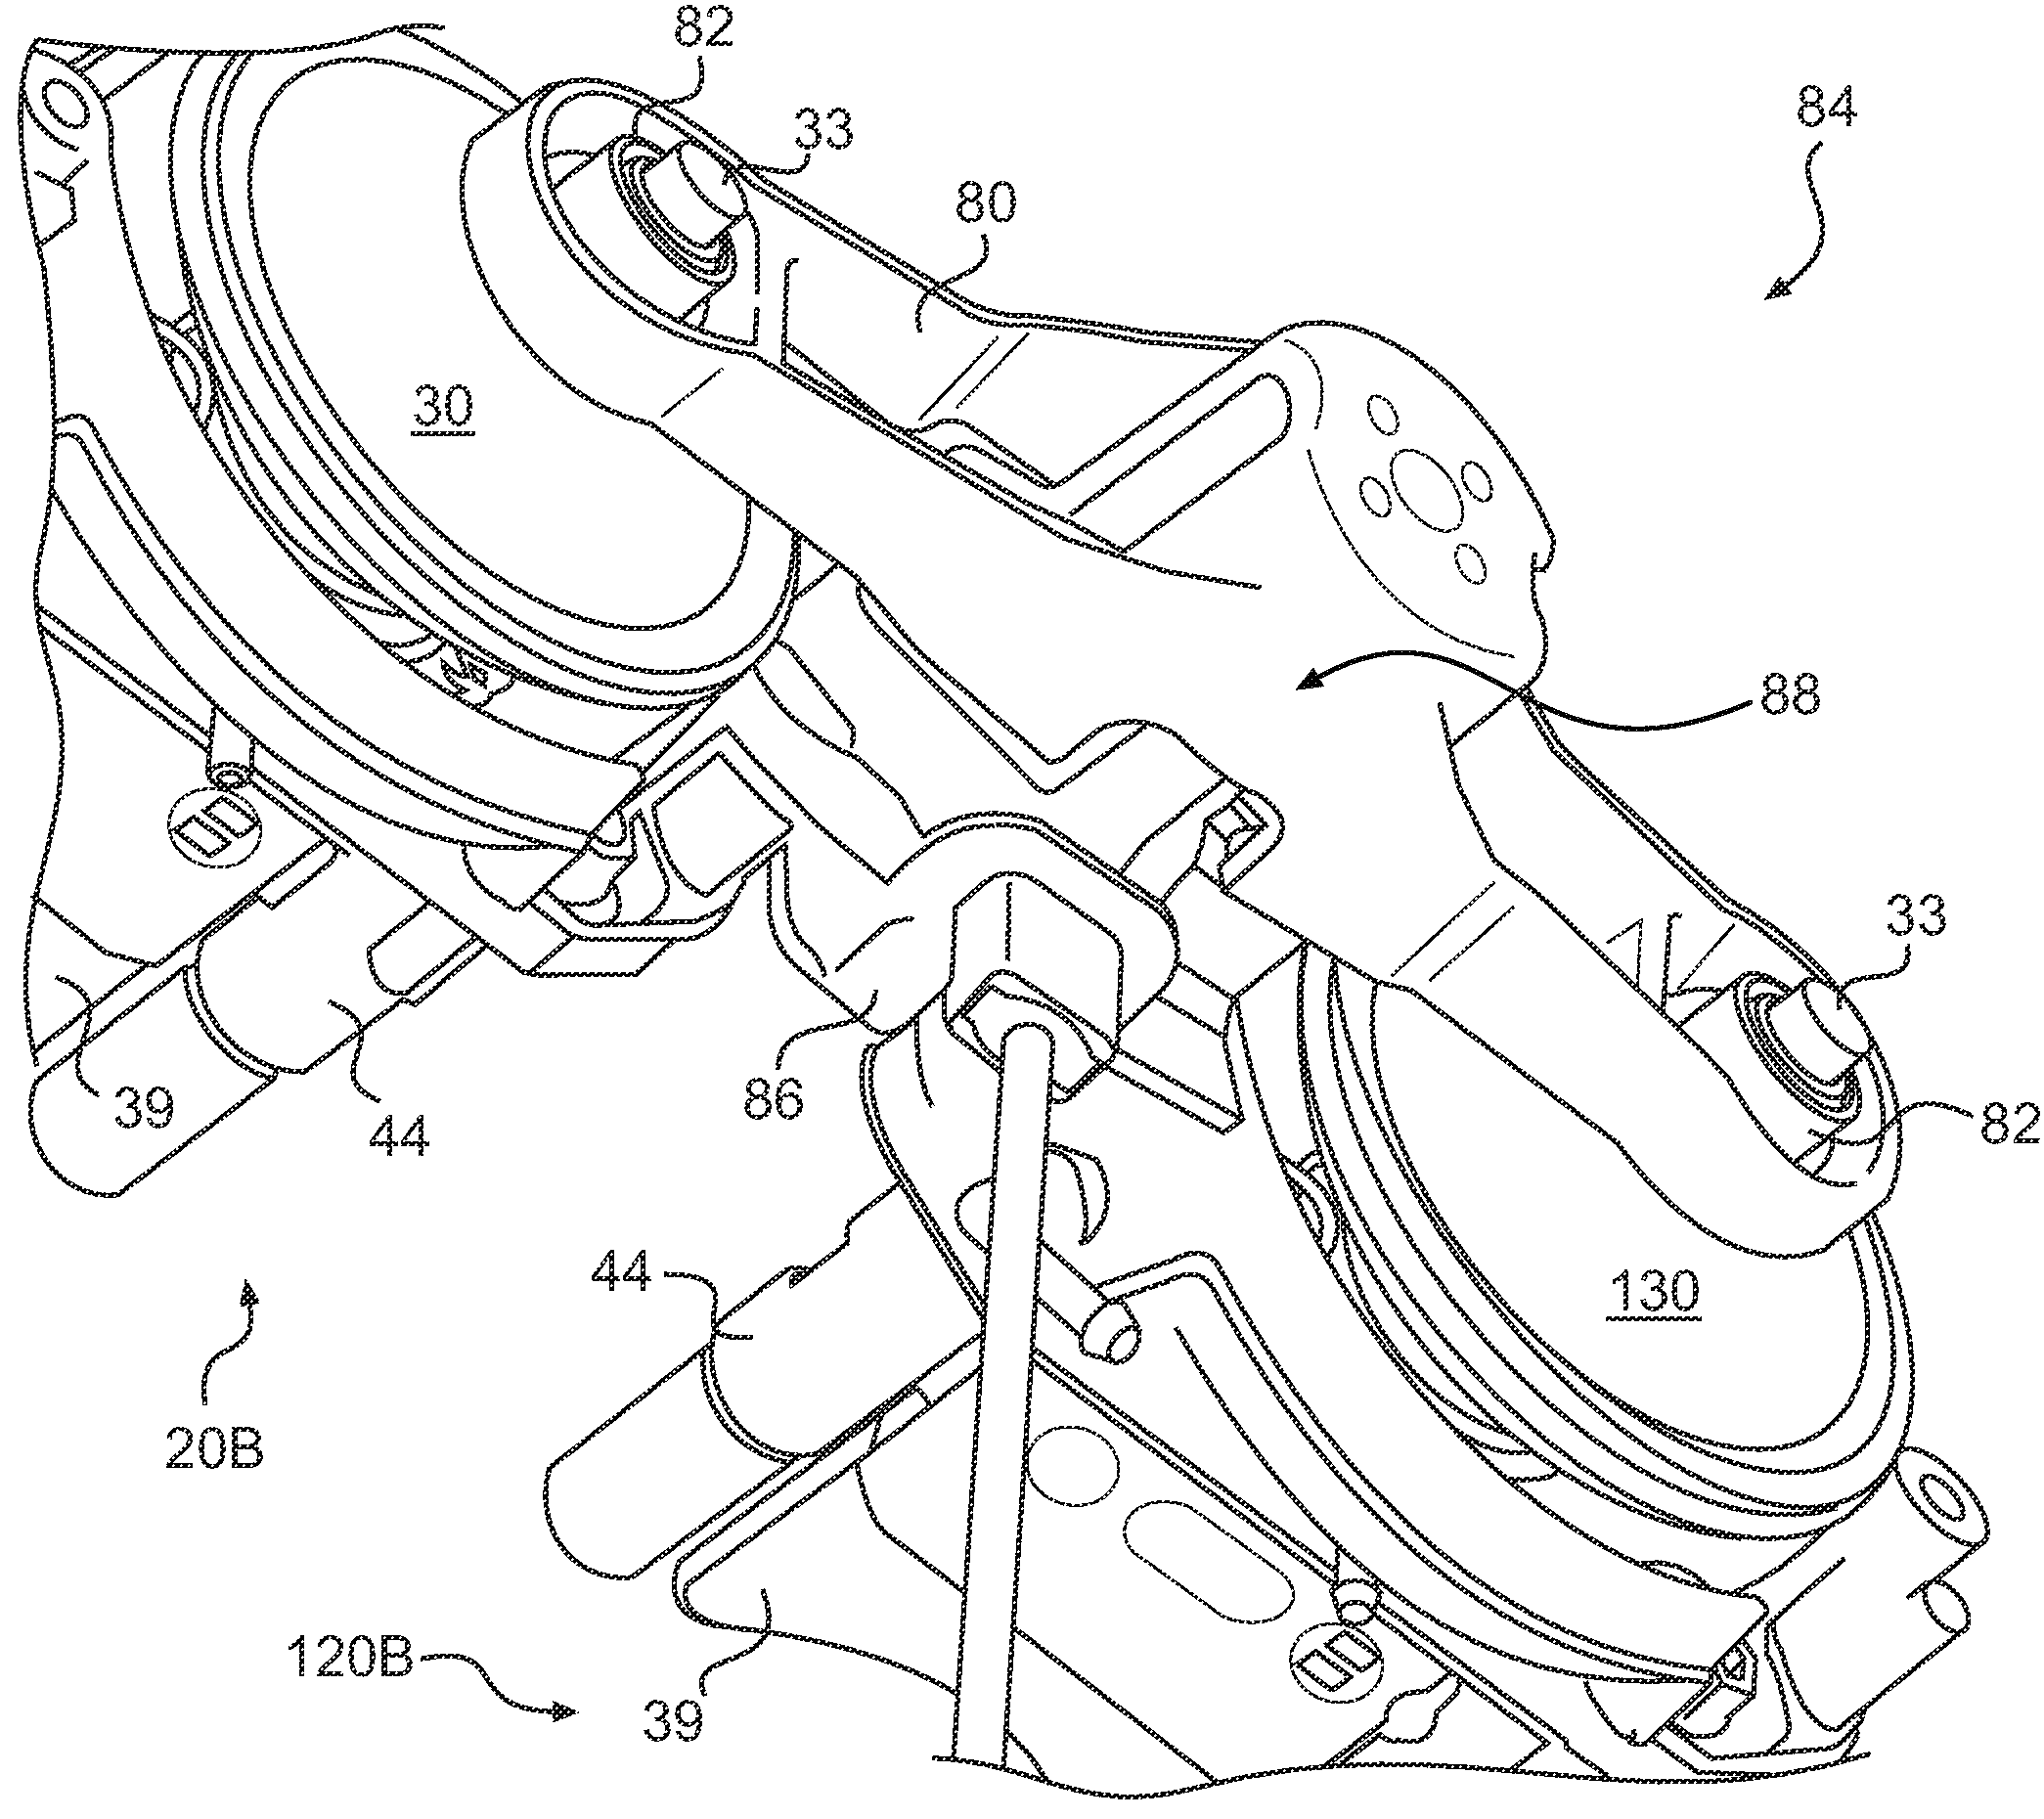 Valve assembly for a two-stroke engine